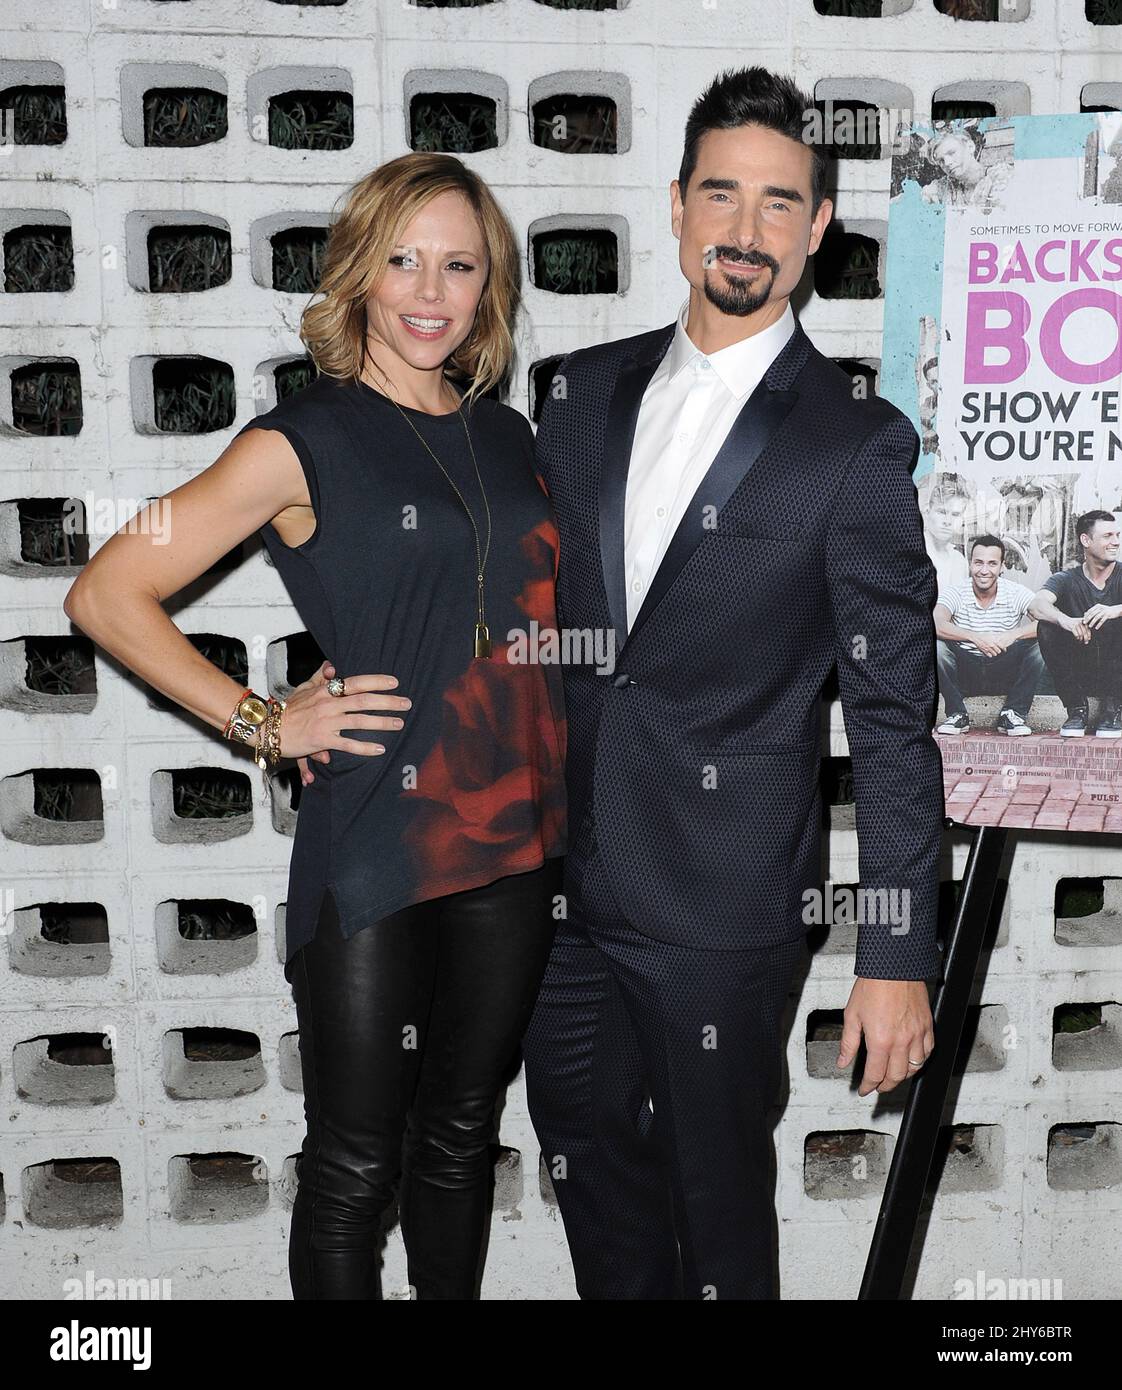 Kevin Richardson, Kristin Richardson attending the premiere of "Backstreet Boys: Show 'em What You're Made Of" held at Arclight Cinemas in Los Angeles, California. Stock Photo